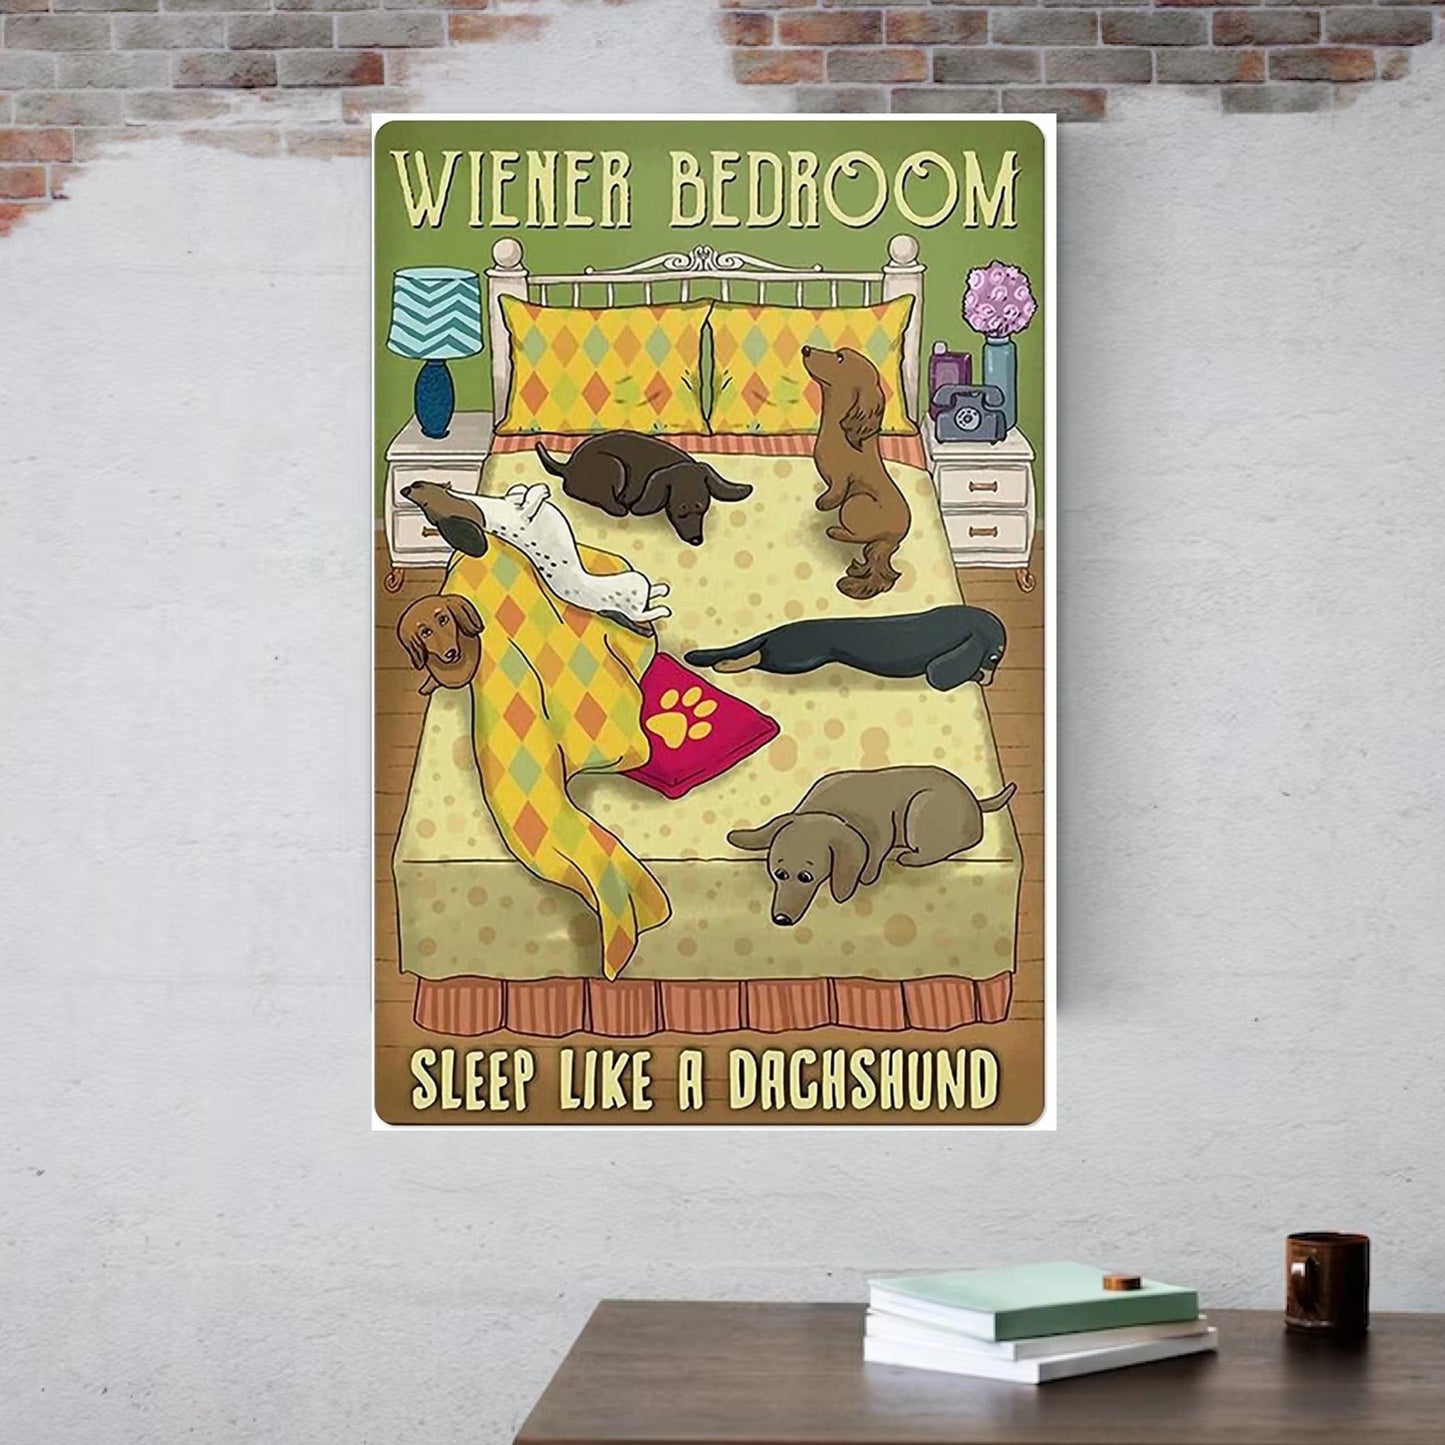 Wiener Bedroom Metal Wall Sign The Doxie World